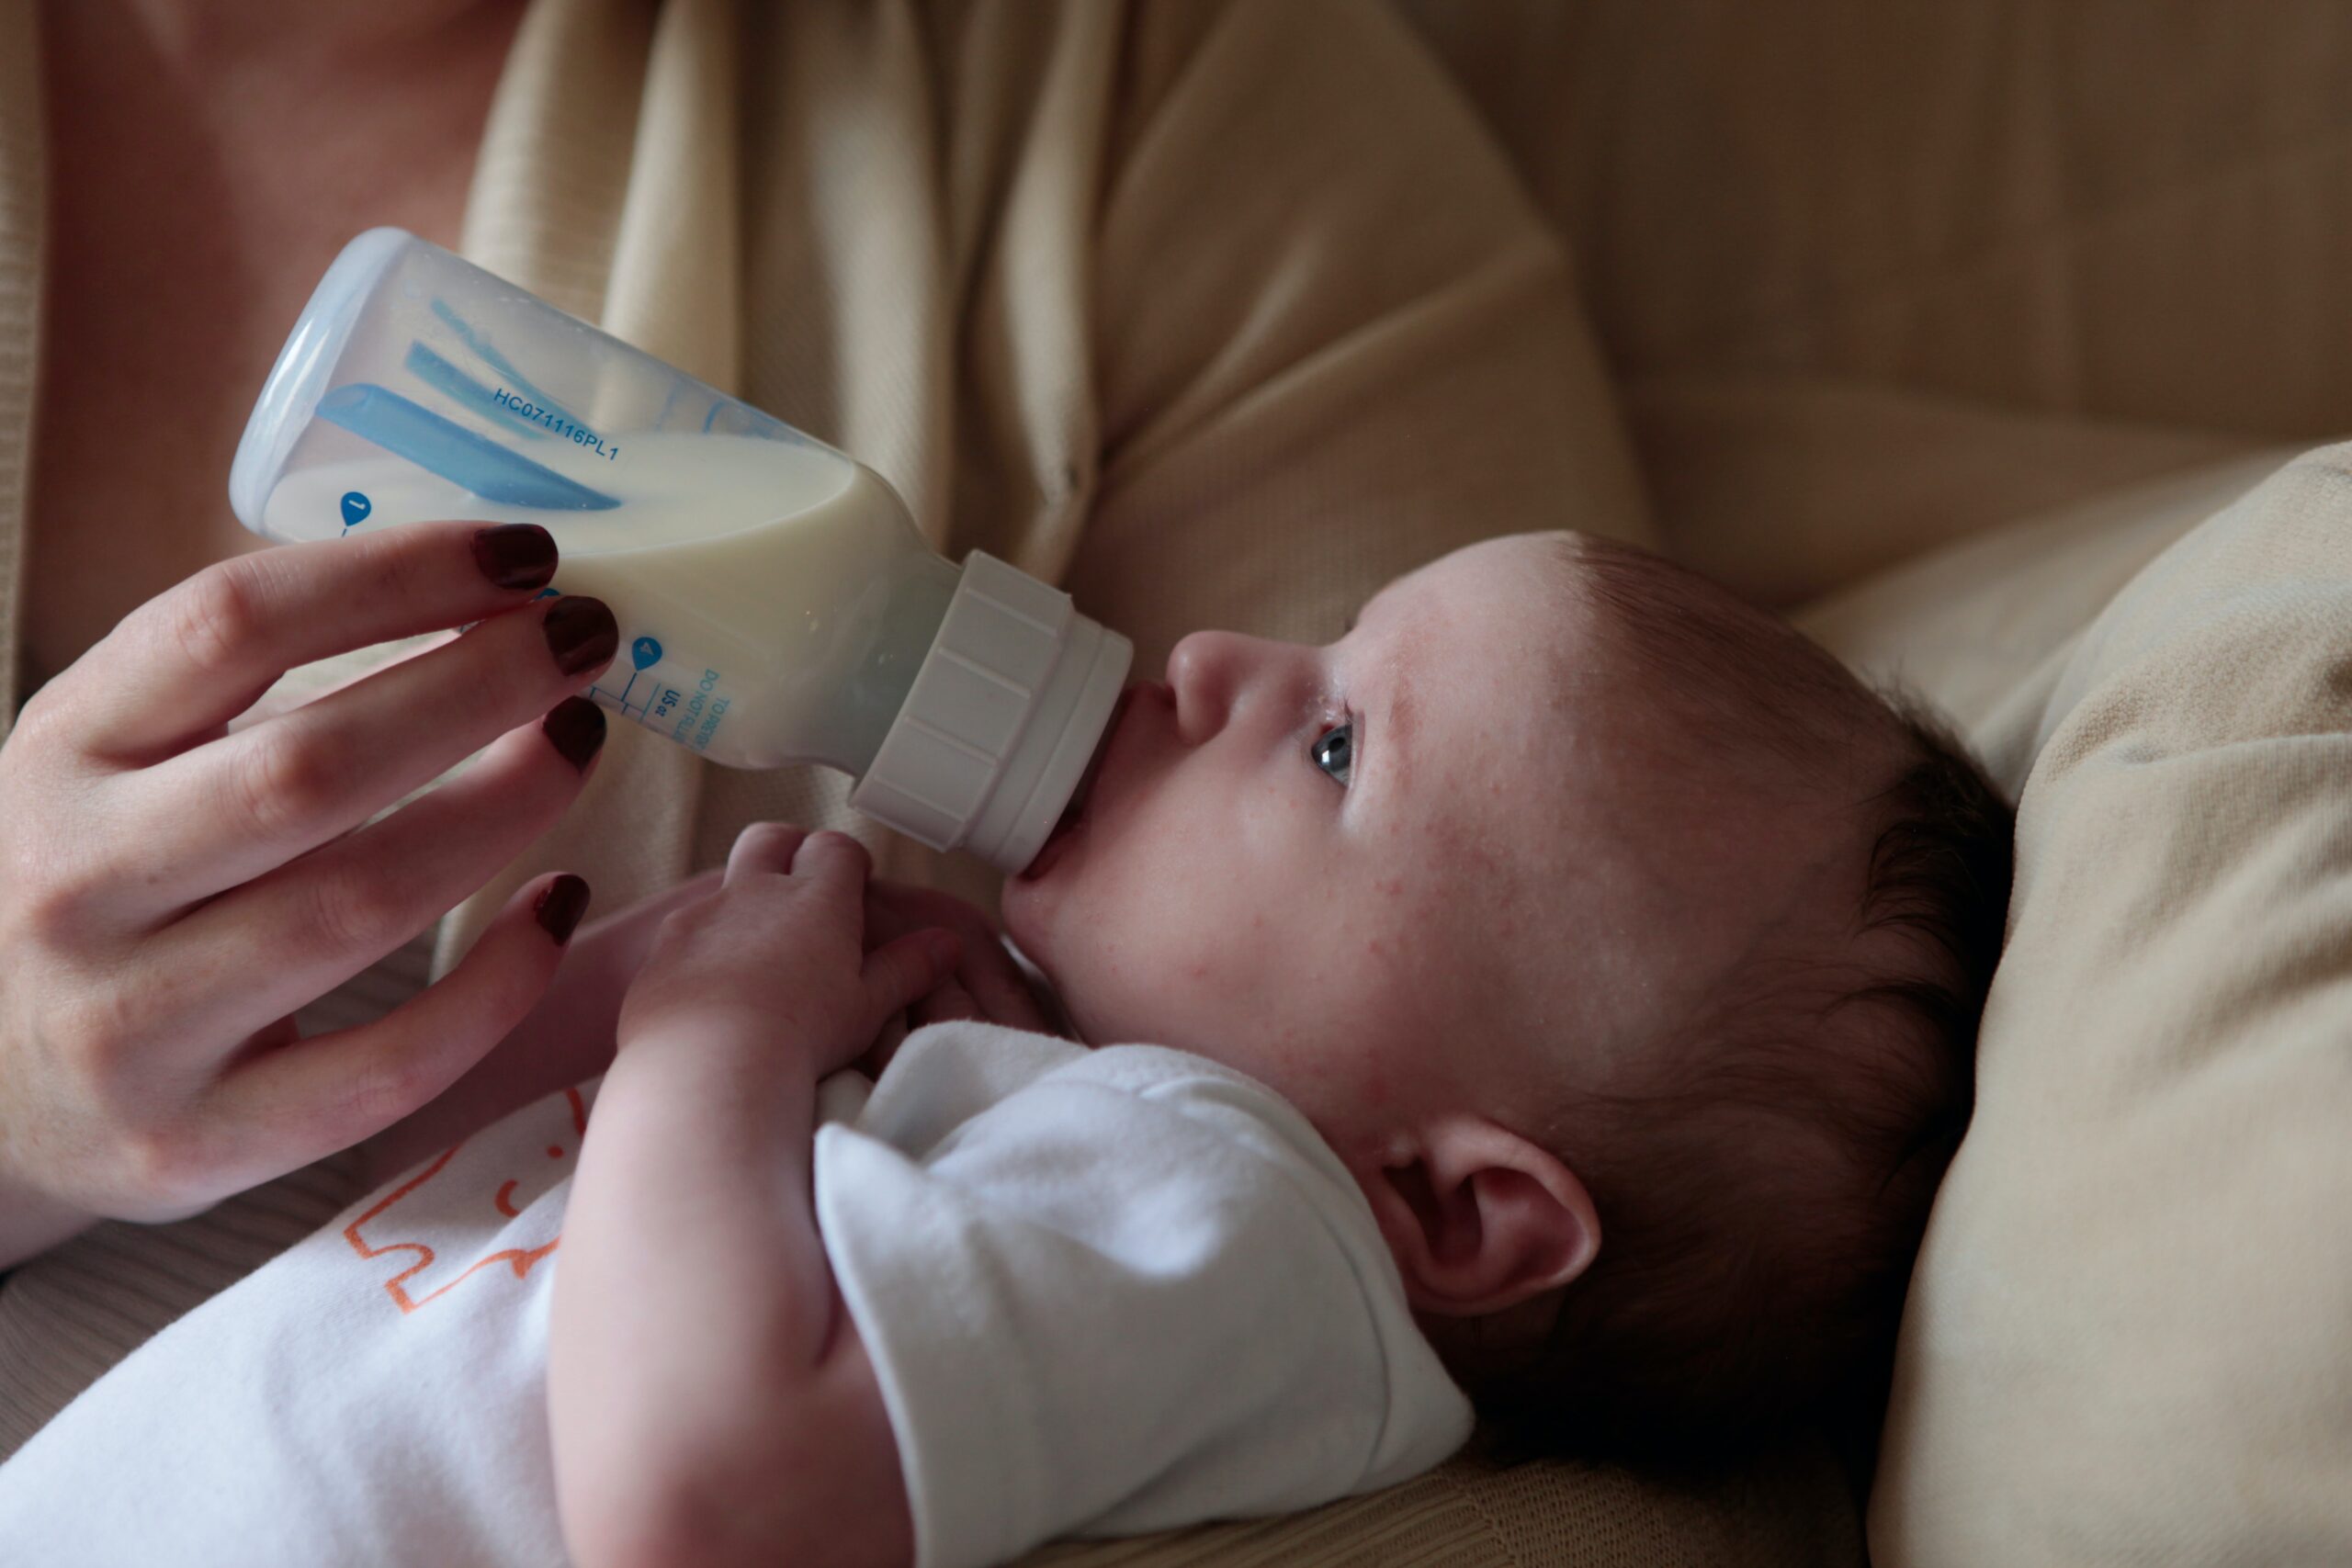 8 Ways to Increase Your Breastmilk Supply